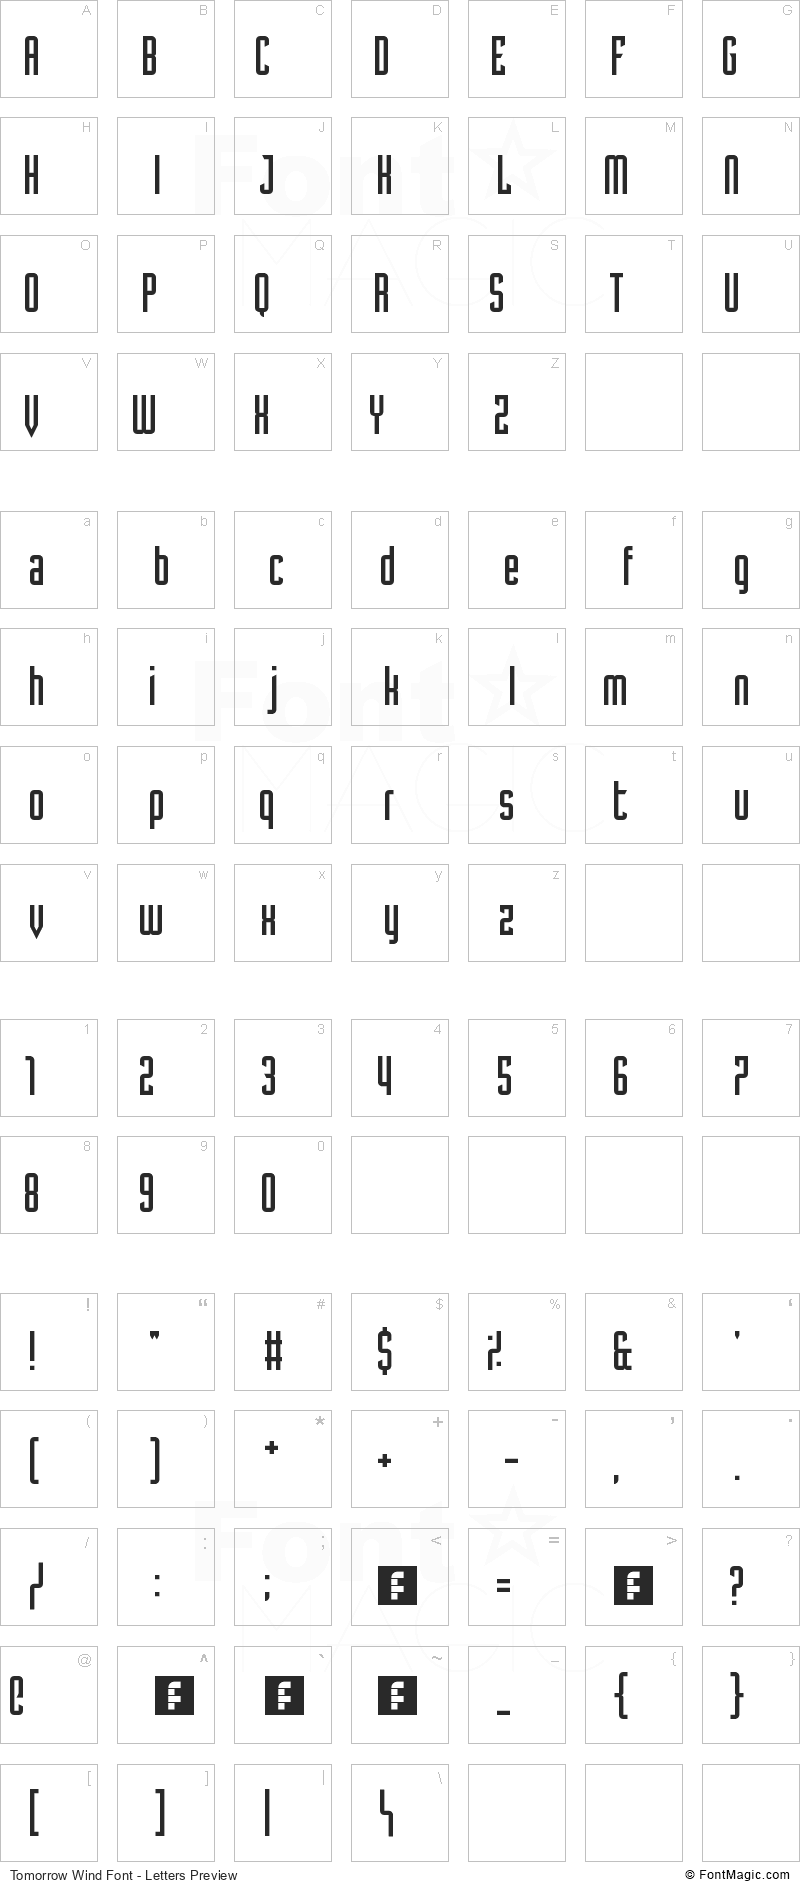 Tomorrow Wind Font - All Latters Preview Chart